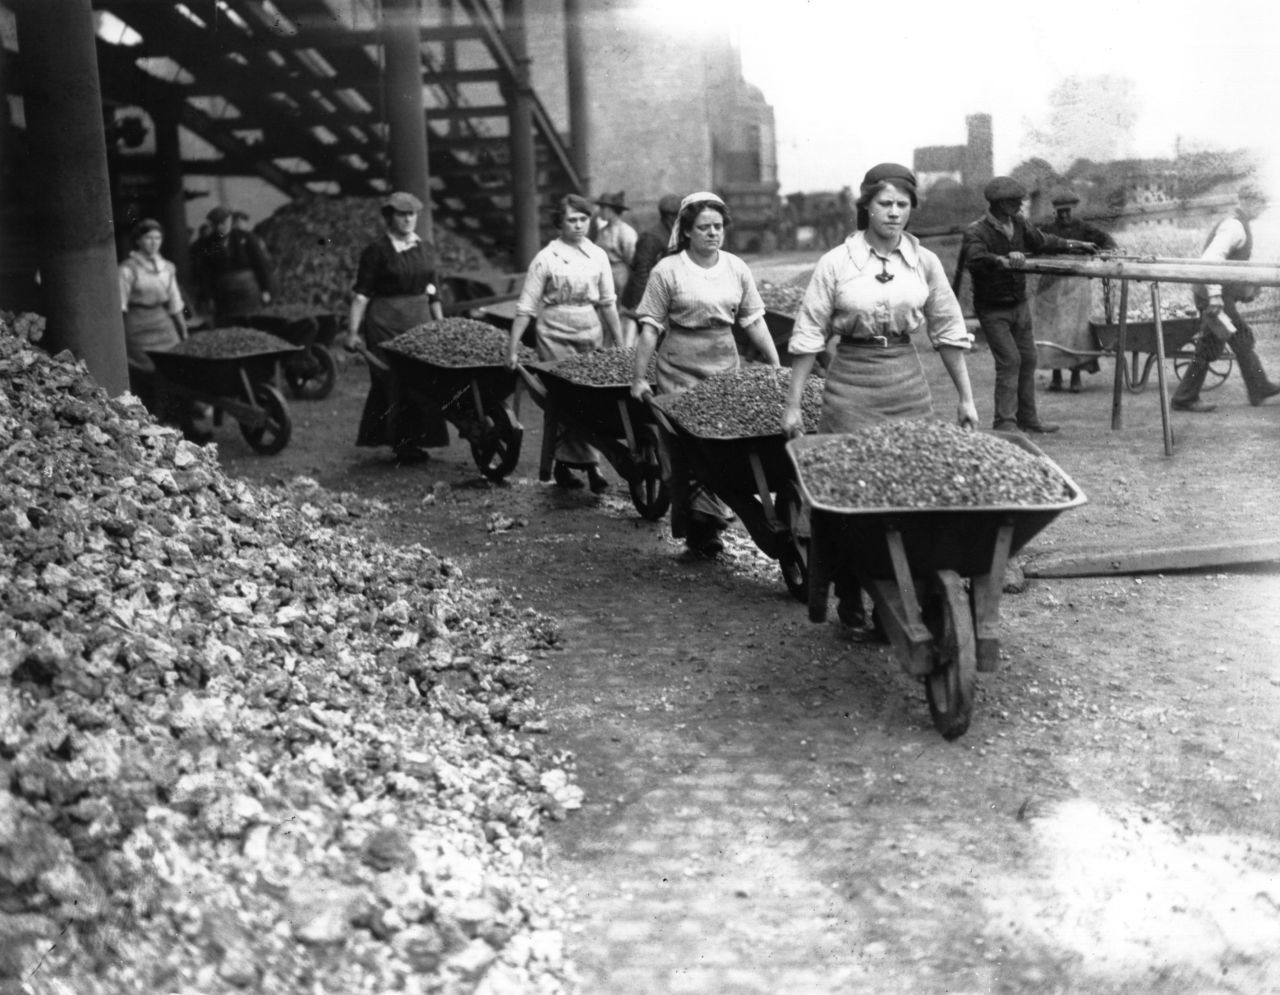 Women "navvies" work on railway building in Coventry, England.